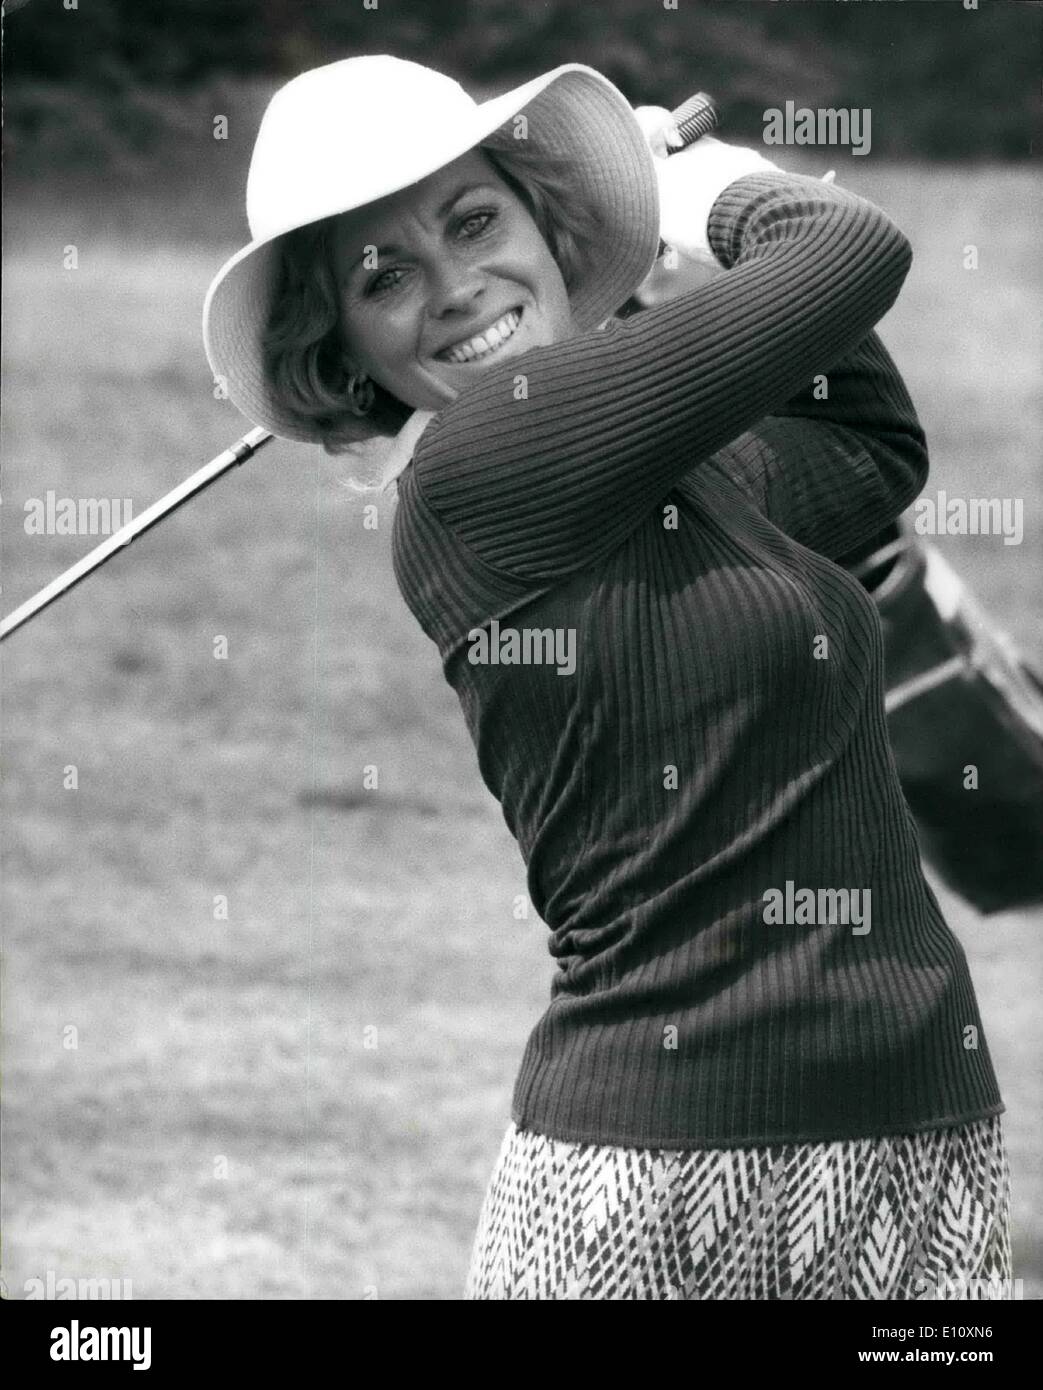 Aug. 08, 1974 - Practicing for the Colgate European Open Golf Championship.: Jan Stevenson, of Australia, pictured at Sunningdale, whilst practicing for the &pound;22,700 Colgate European Open Championship - Women's Invitational Golf Tournament, which begins on August 8th. Stock Photo